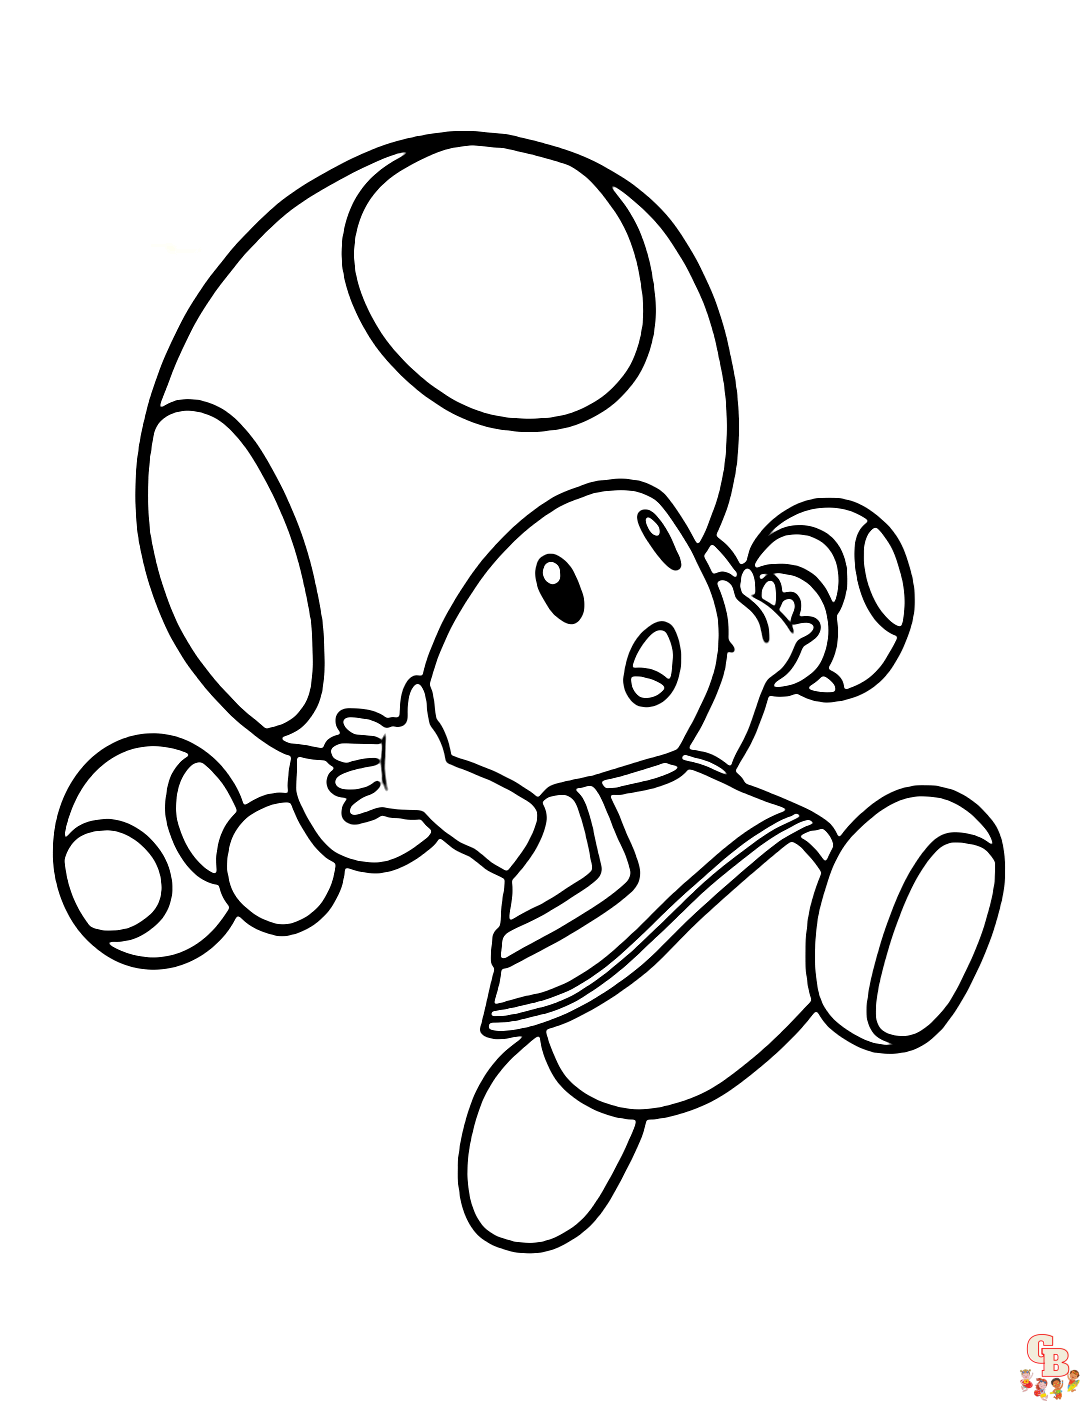 toadette coloring pages printable free